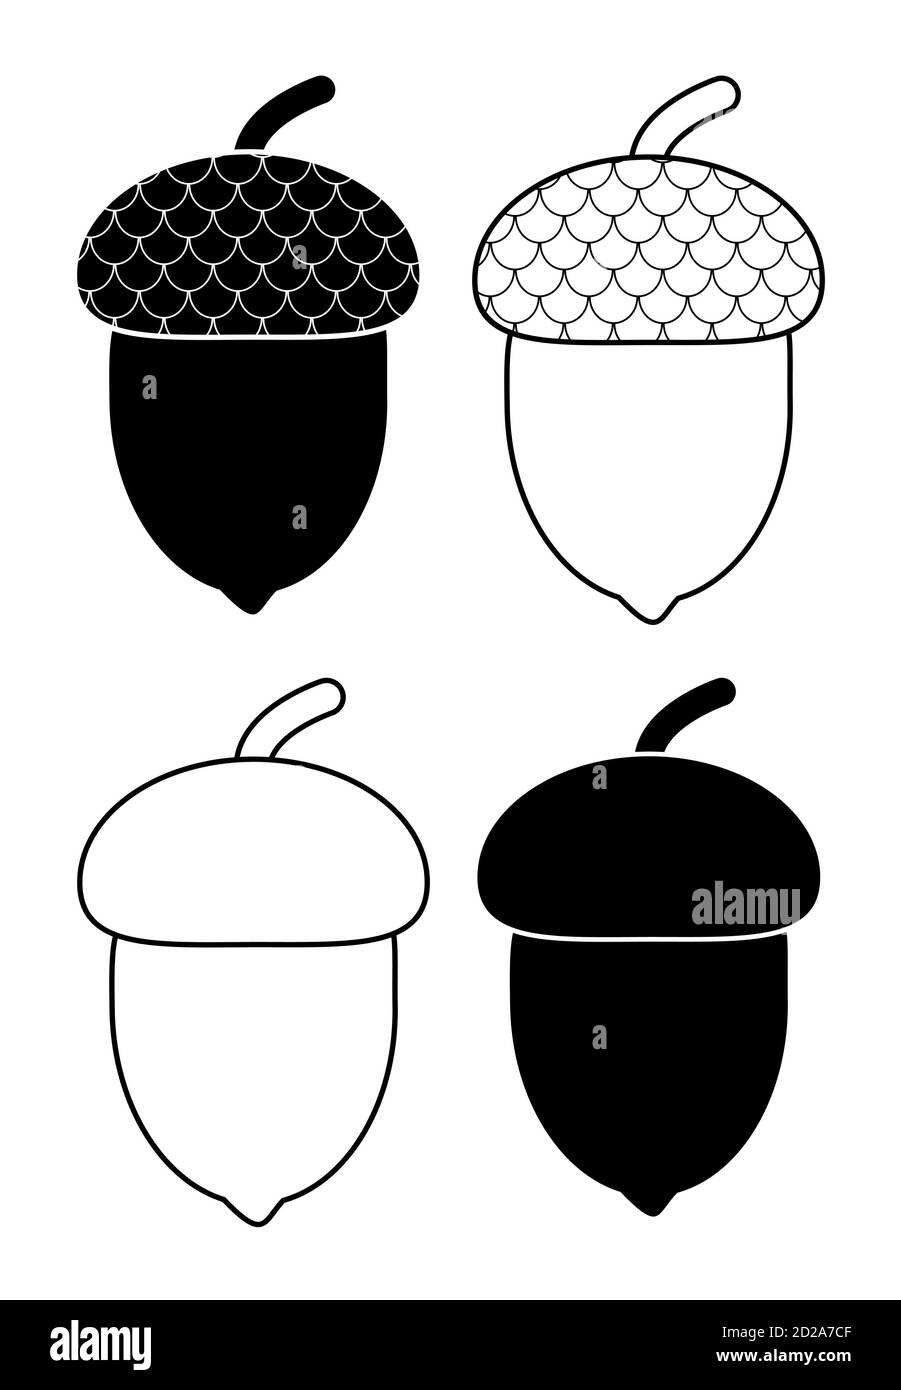 Acorn outlined and silhouetted autumnal design element set isolated on white. Illustrationof oak tree fruits with caps.  Black and white oak acorns wi Stock Vector